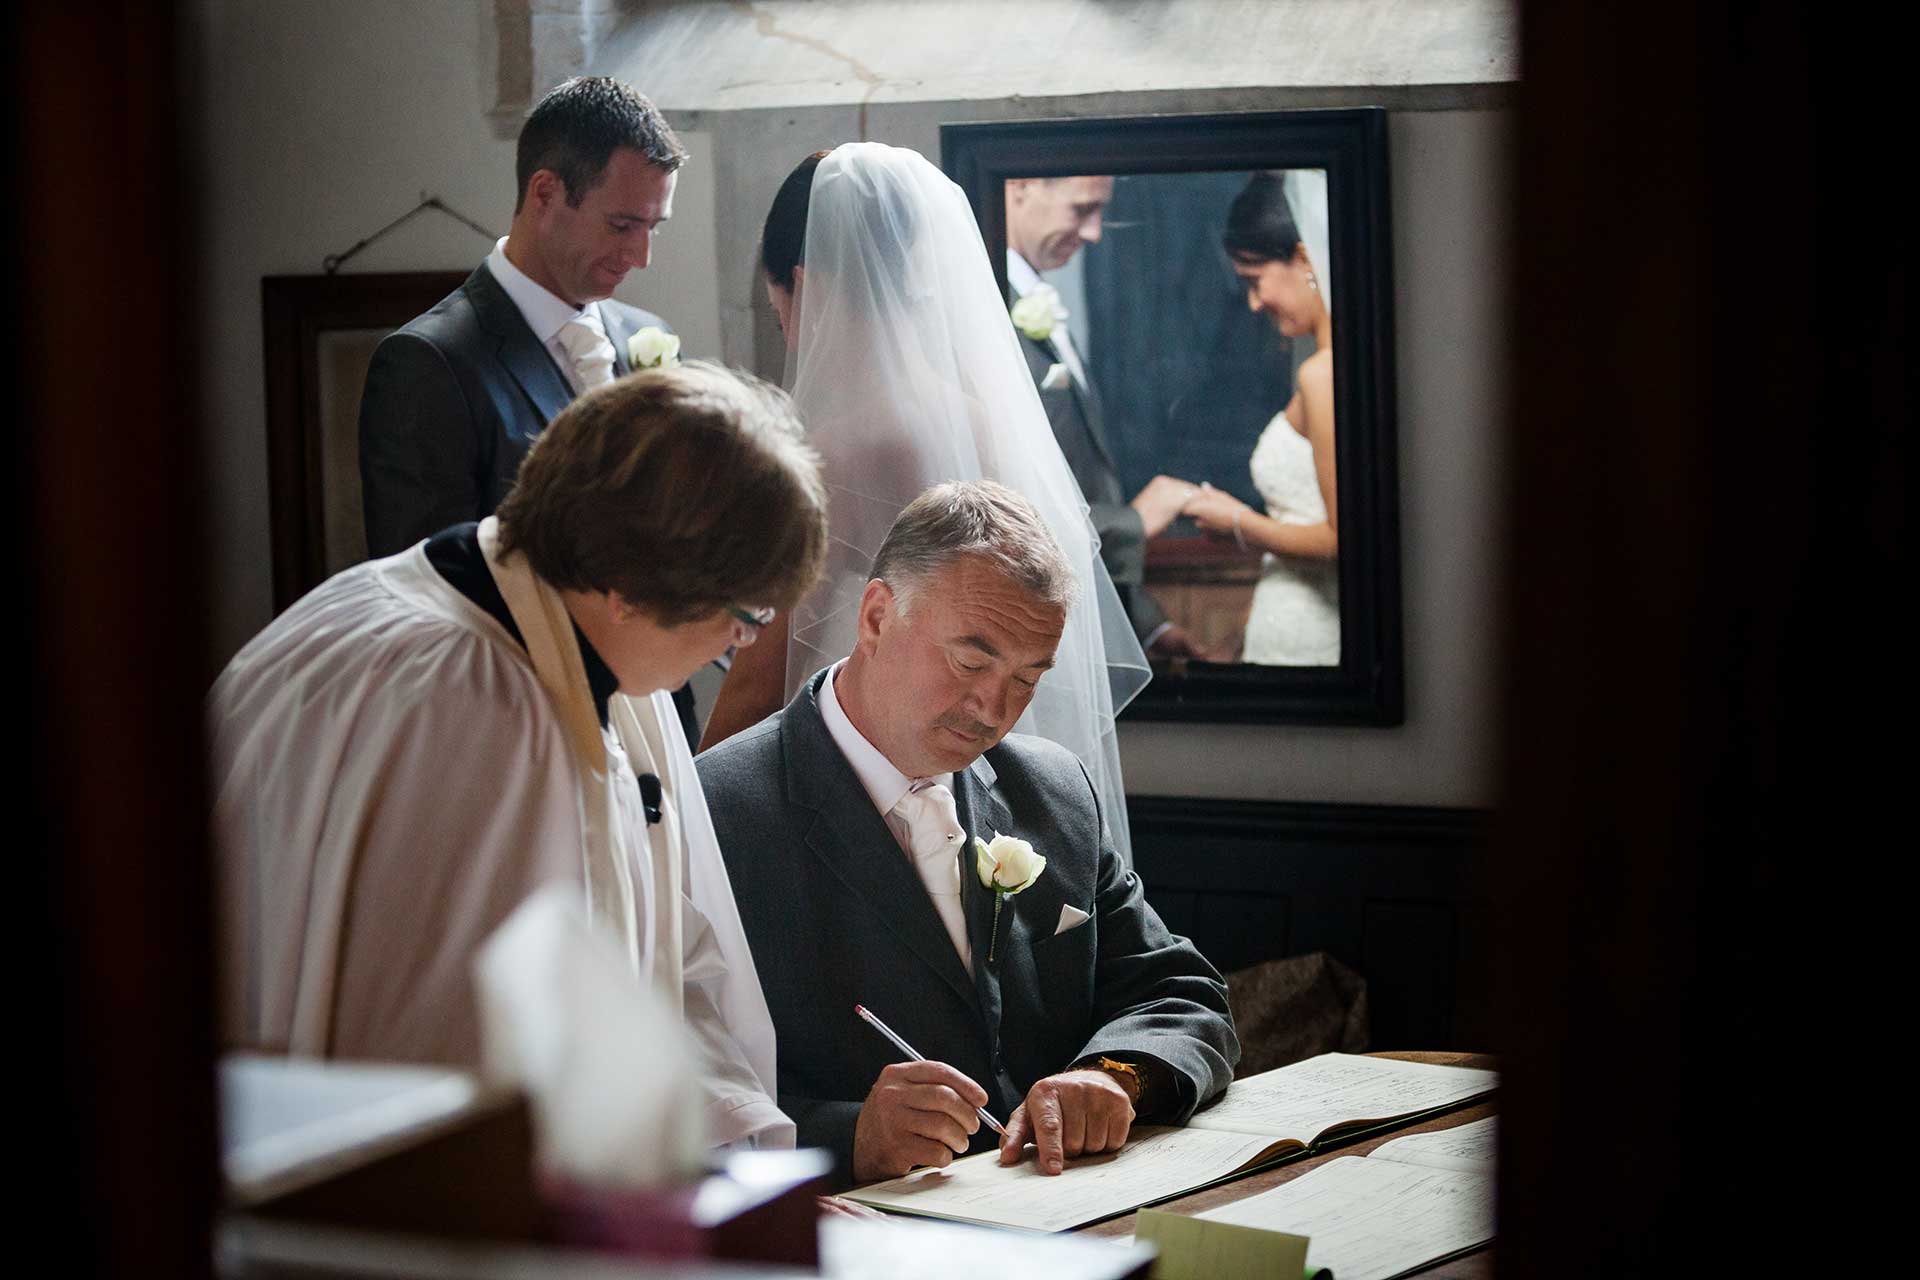 Father of the bride signing the register